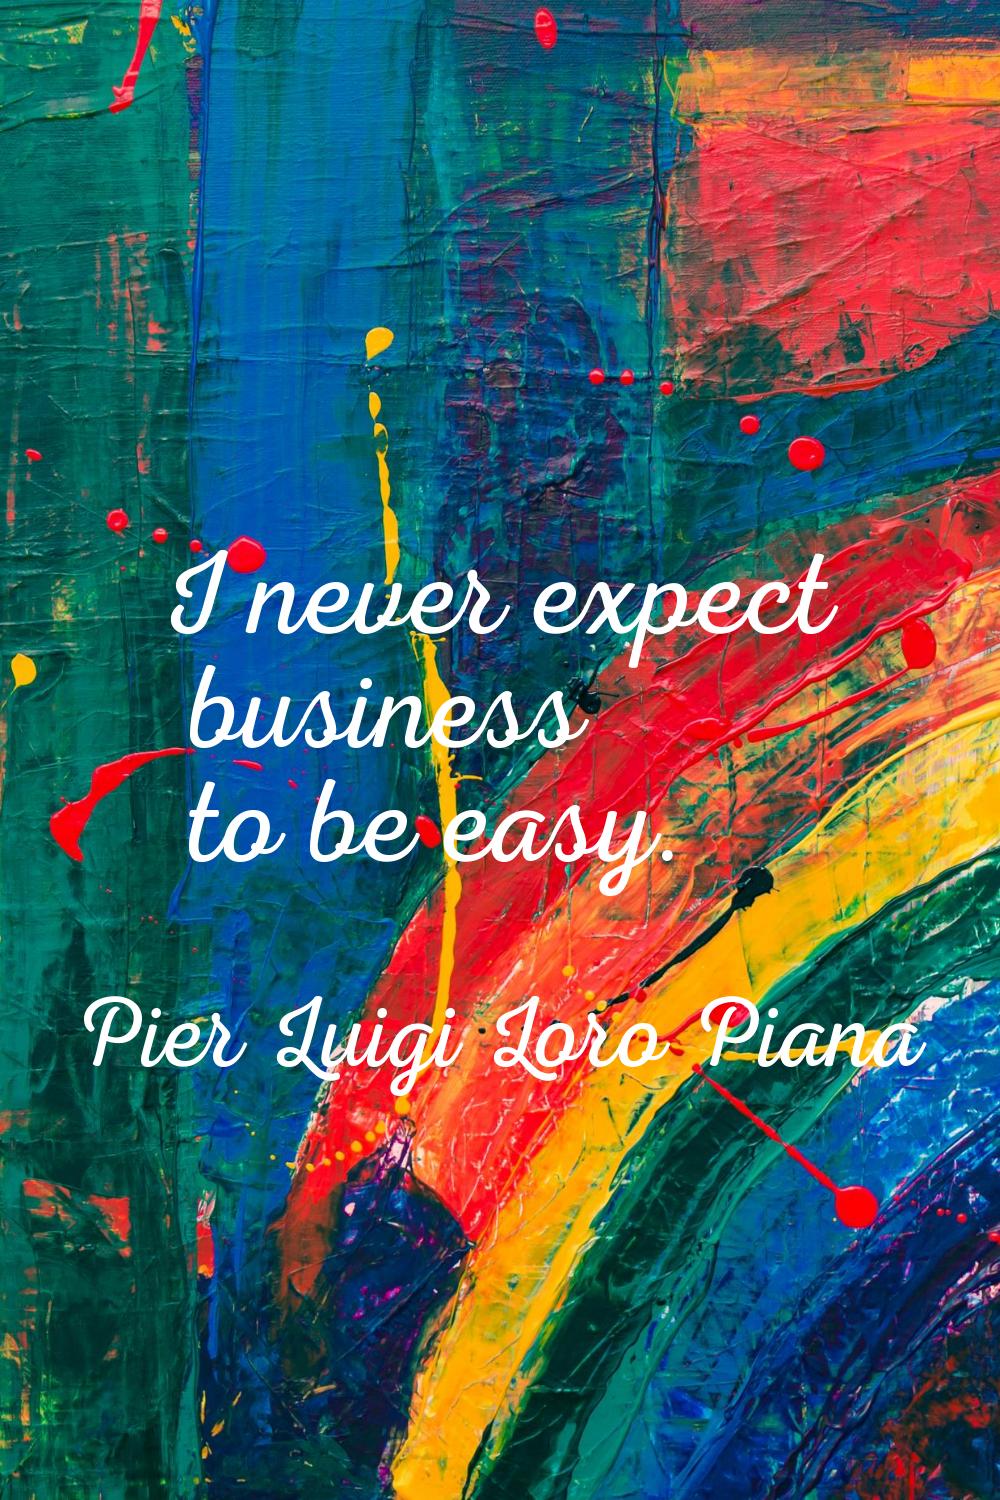 I never expect business to be easy.